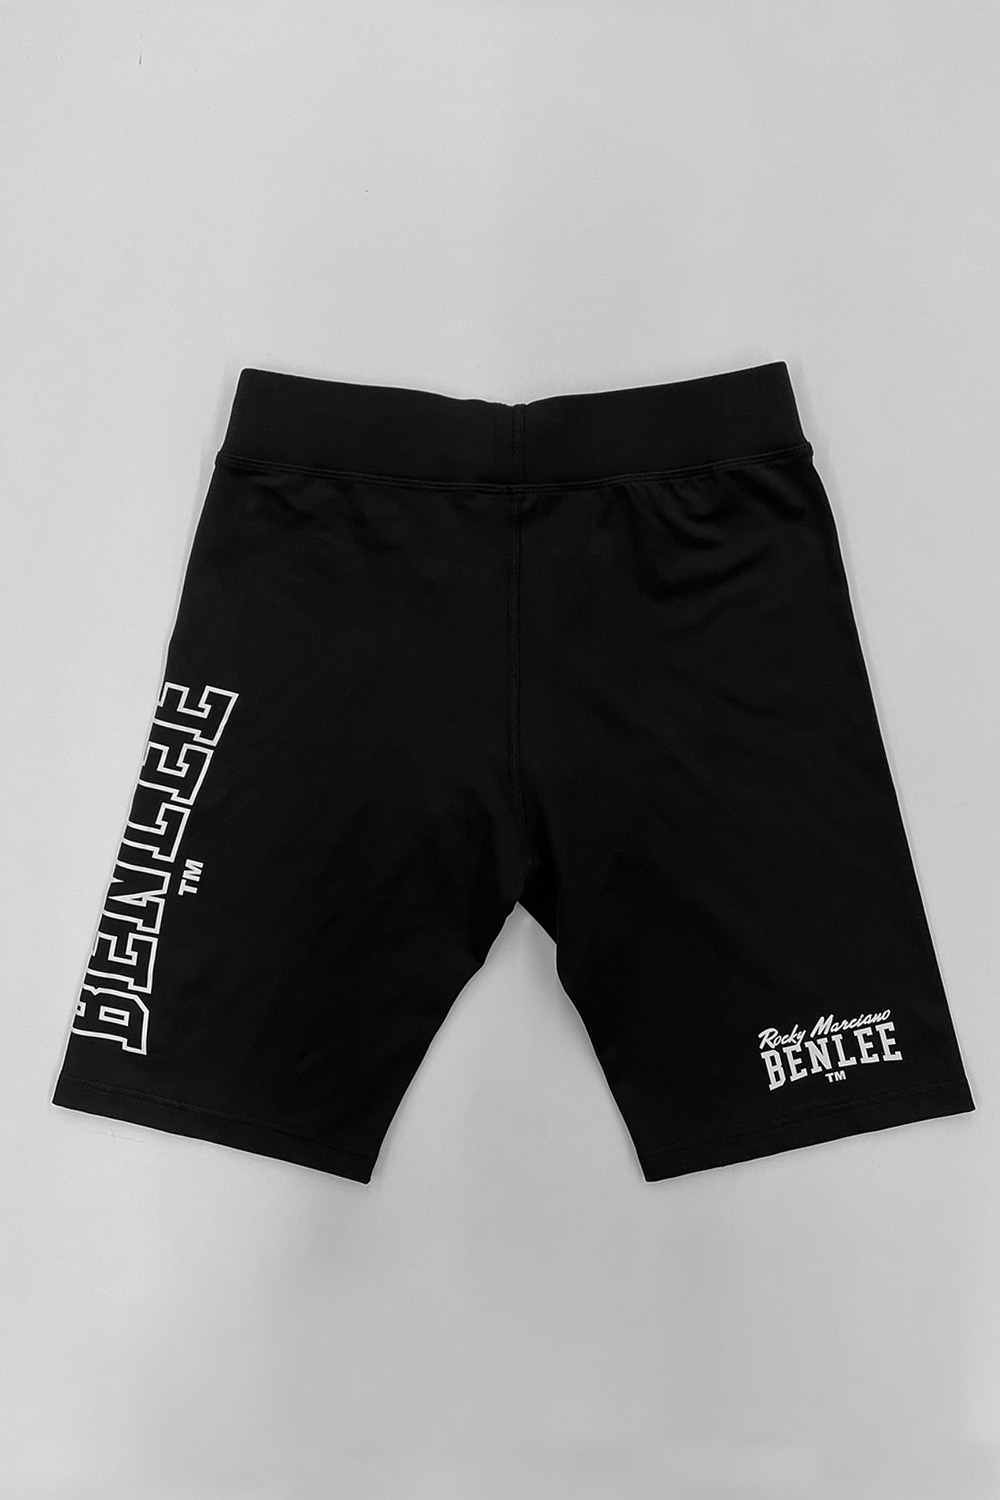 Lonsdale Mens compression shorts with cup groin protection